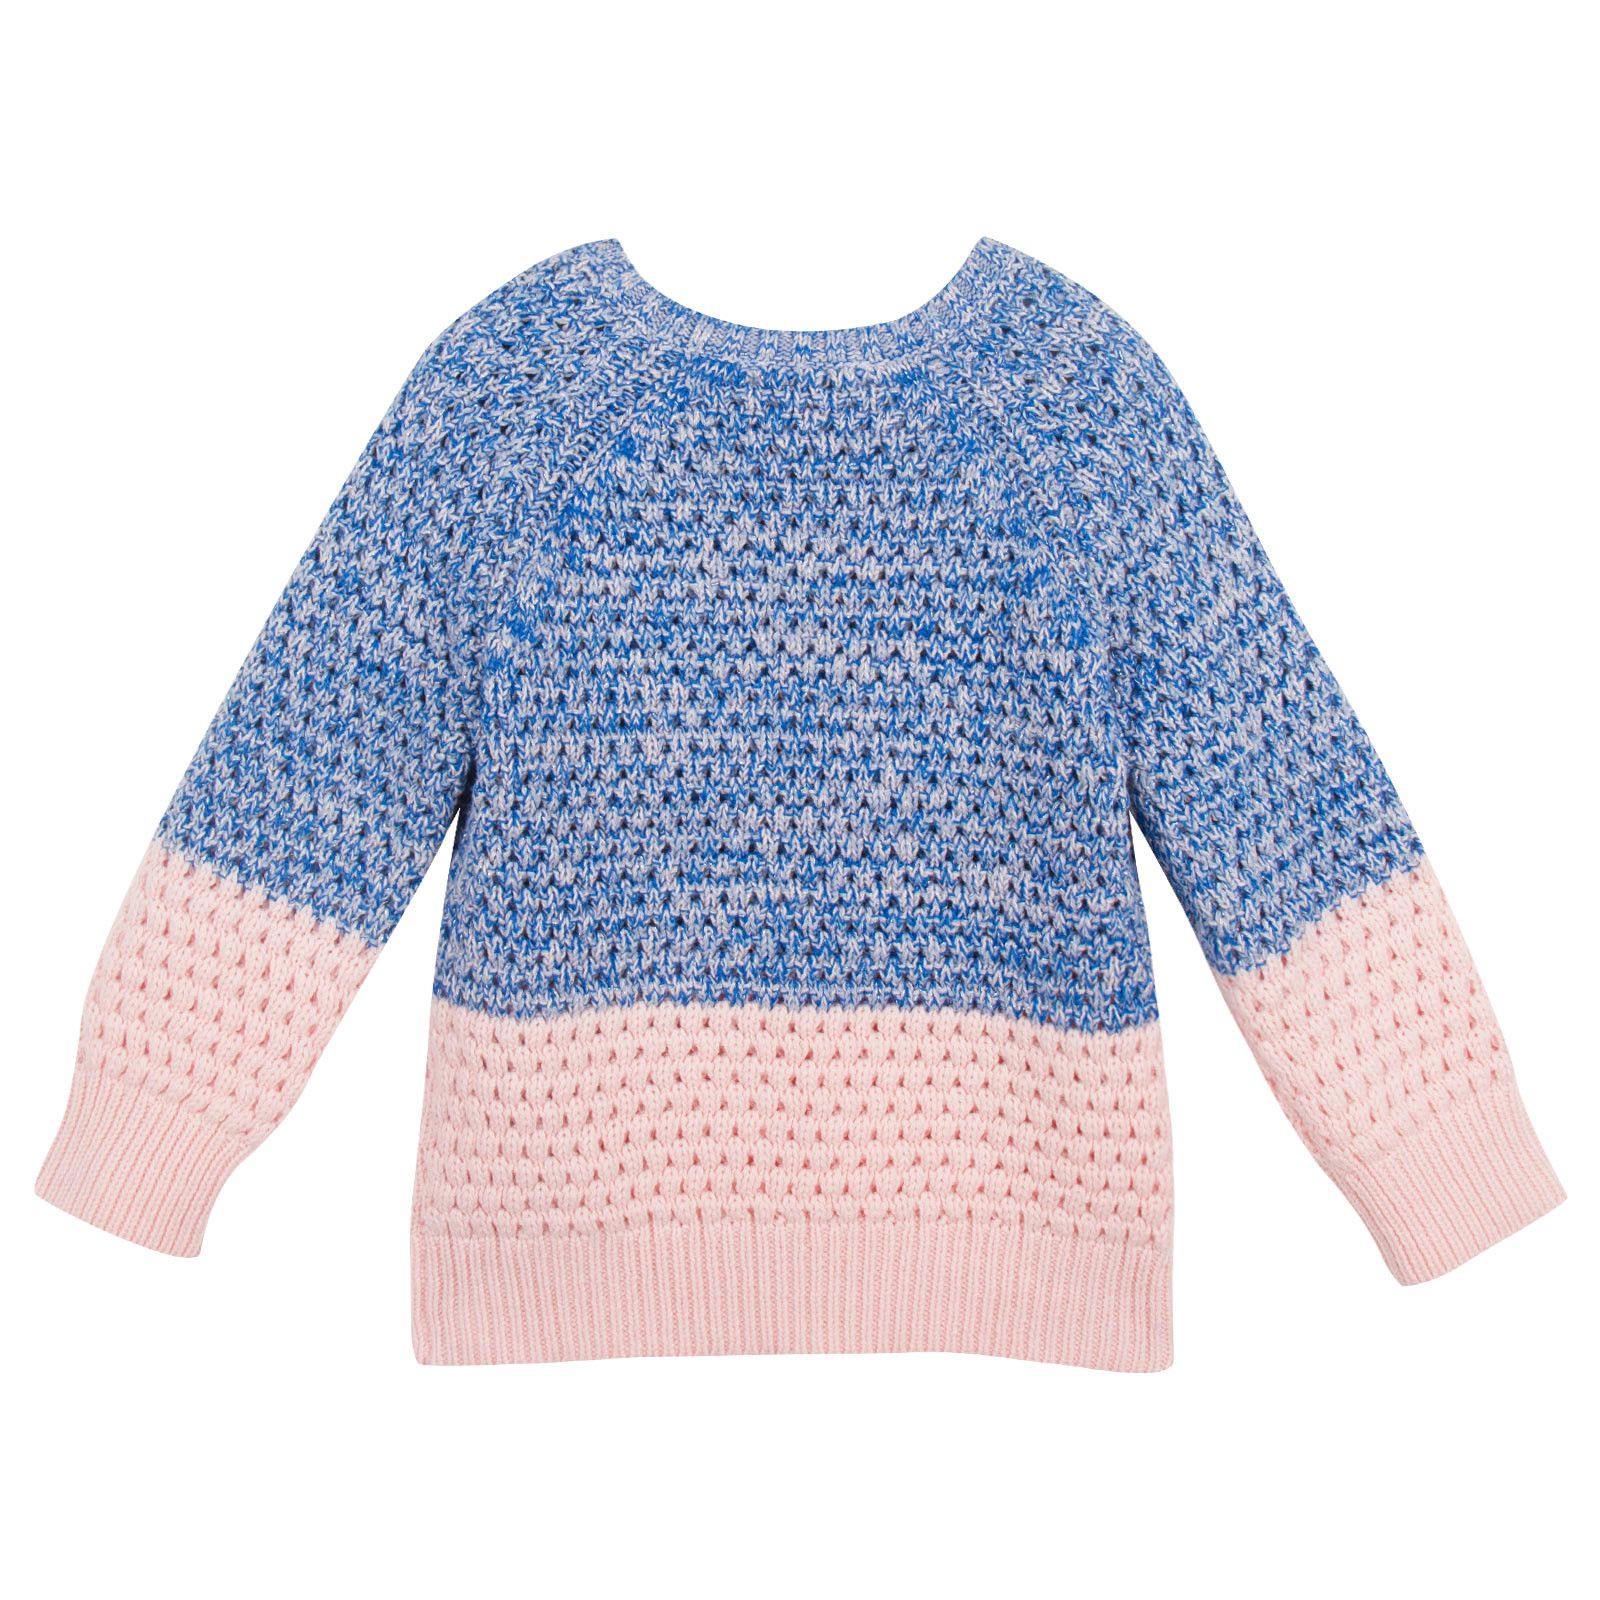 Girls Blue&Pink Two Tone Sweater With Embroidered Heart Logo - CÉMAROSE | Children's Fashion Store - 2